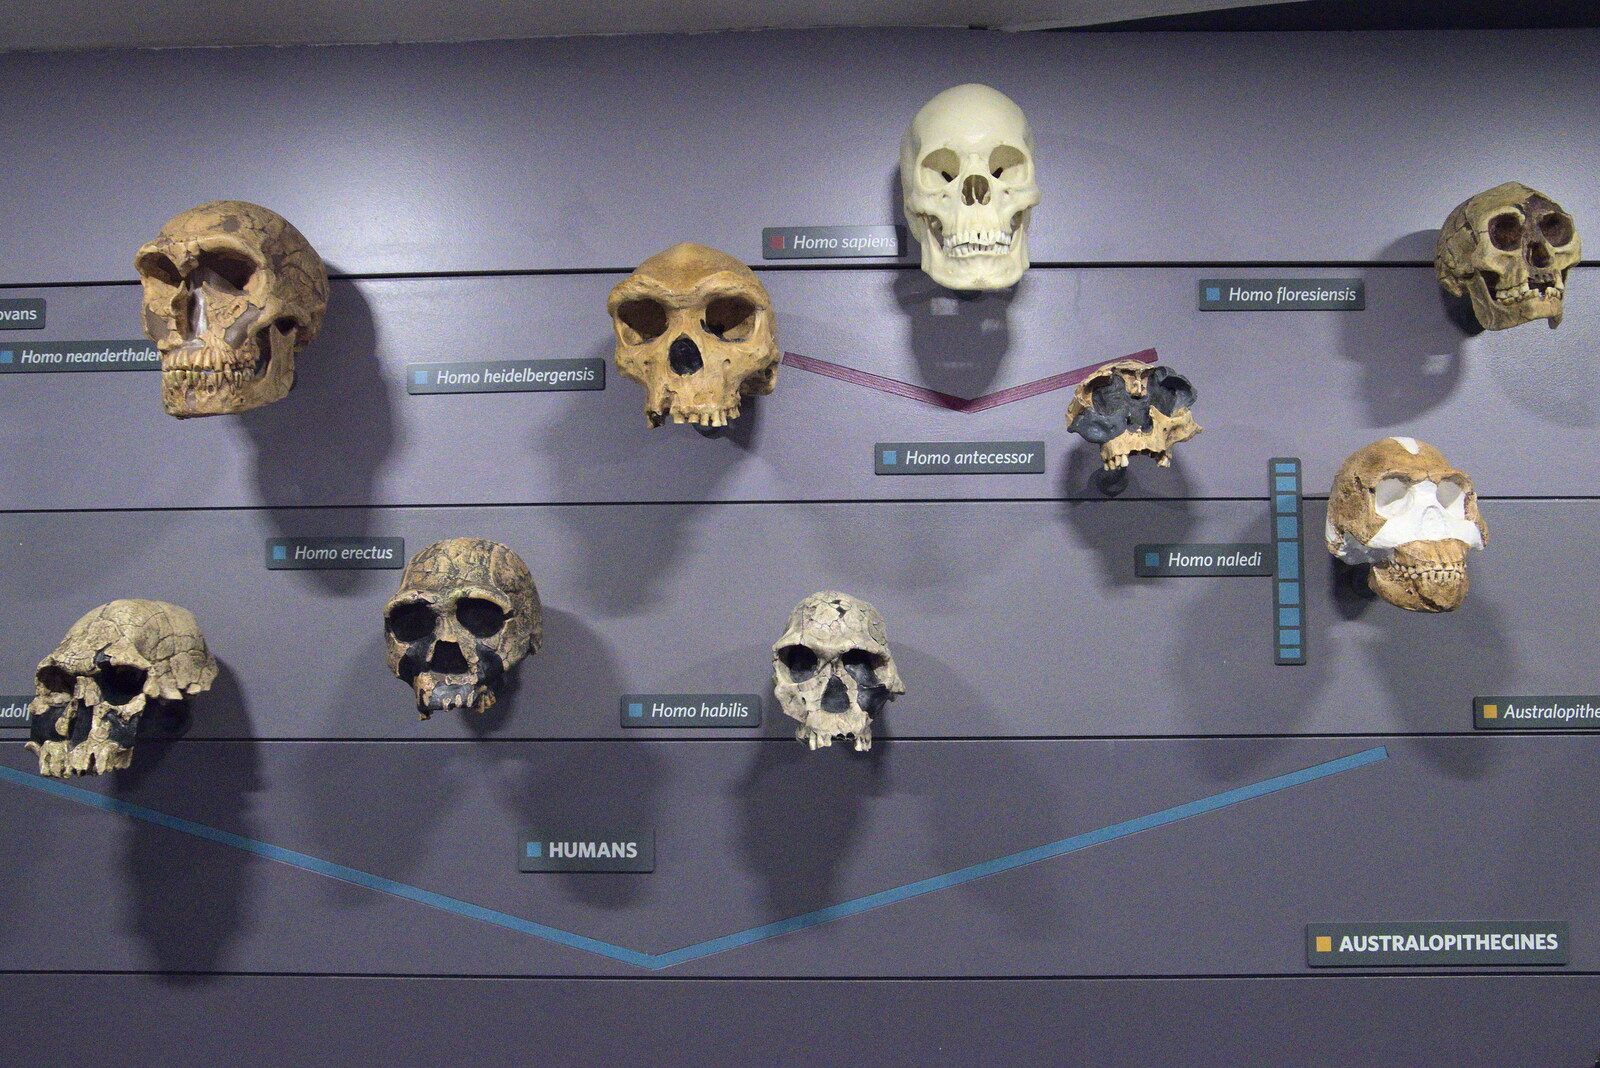 A collection of hominid skulls from A Trip to the Natural History Museum, Kensington, London - 15th January 2022